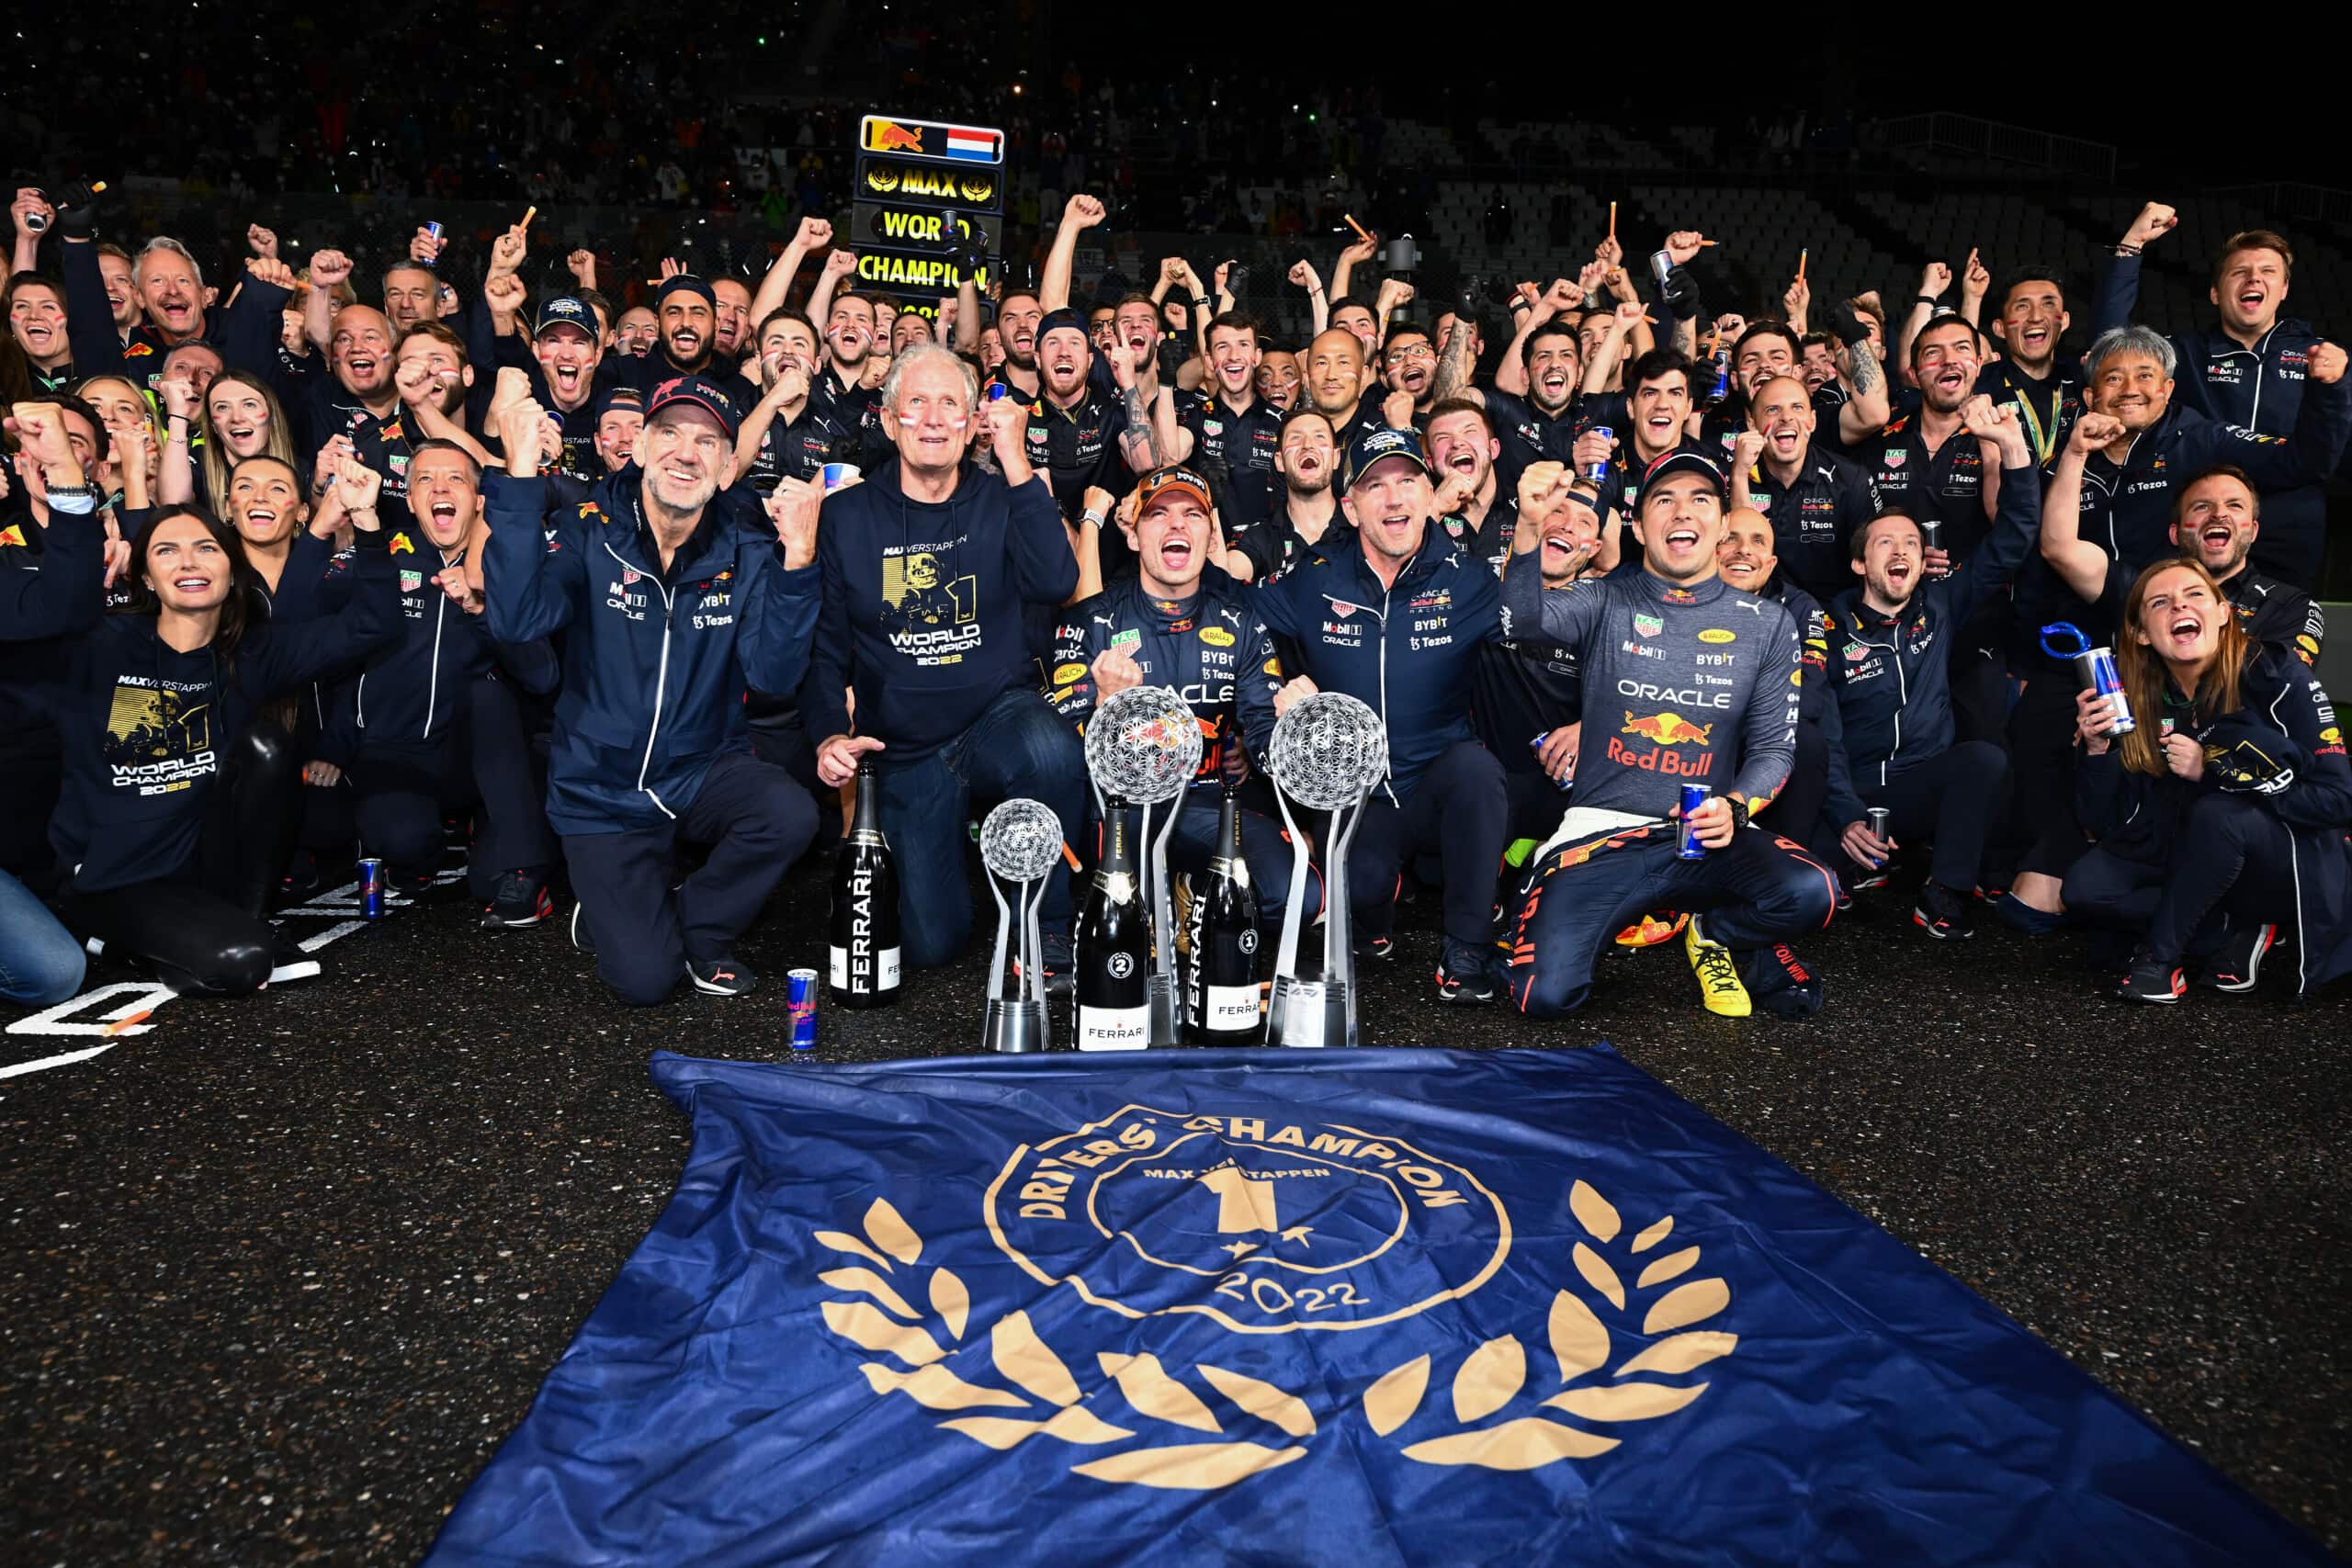 SUZUKA, JAPAN - OCTOBER 09: Race winner and 2022 F1 World Drivers Champion Max Verstappen of Netherlands and Oracle Red Bull Racing celebrates with his team after the F1 Grand Prix of Japan at Suzuka International Racing Course on October 09, 2022 in Suzuka, Japan. (Photo by Clive Mason/Getty Images) // Getty Images / Red Bull Content Pool // SI202210090532 // Usage for editorial use only //